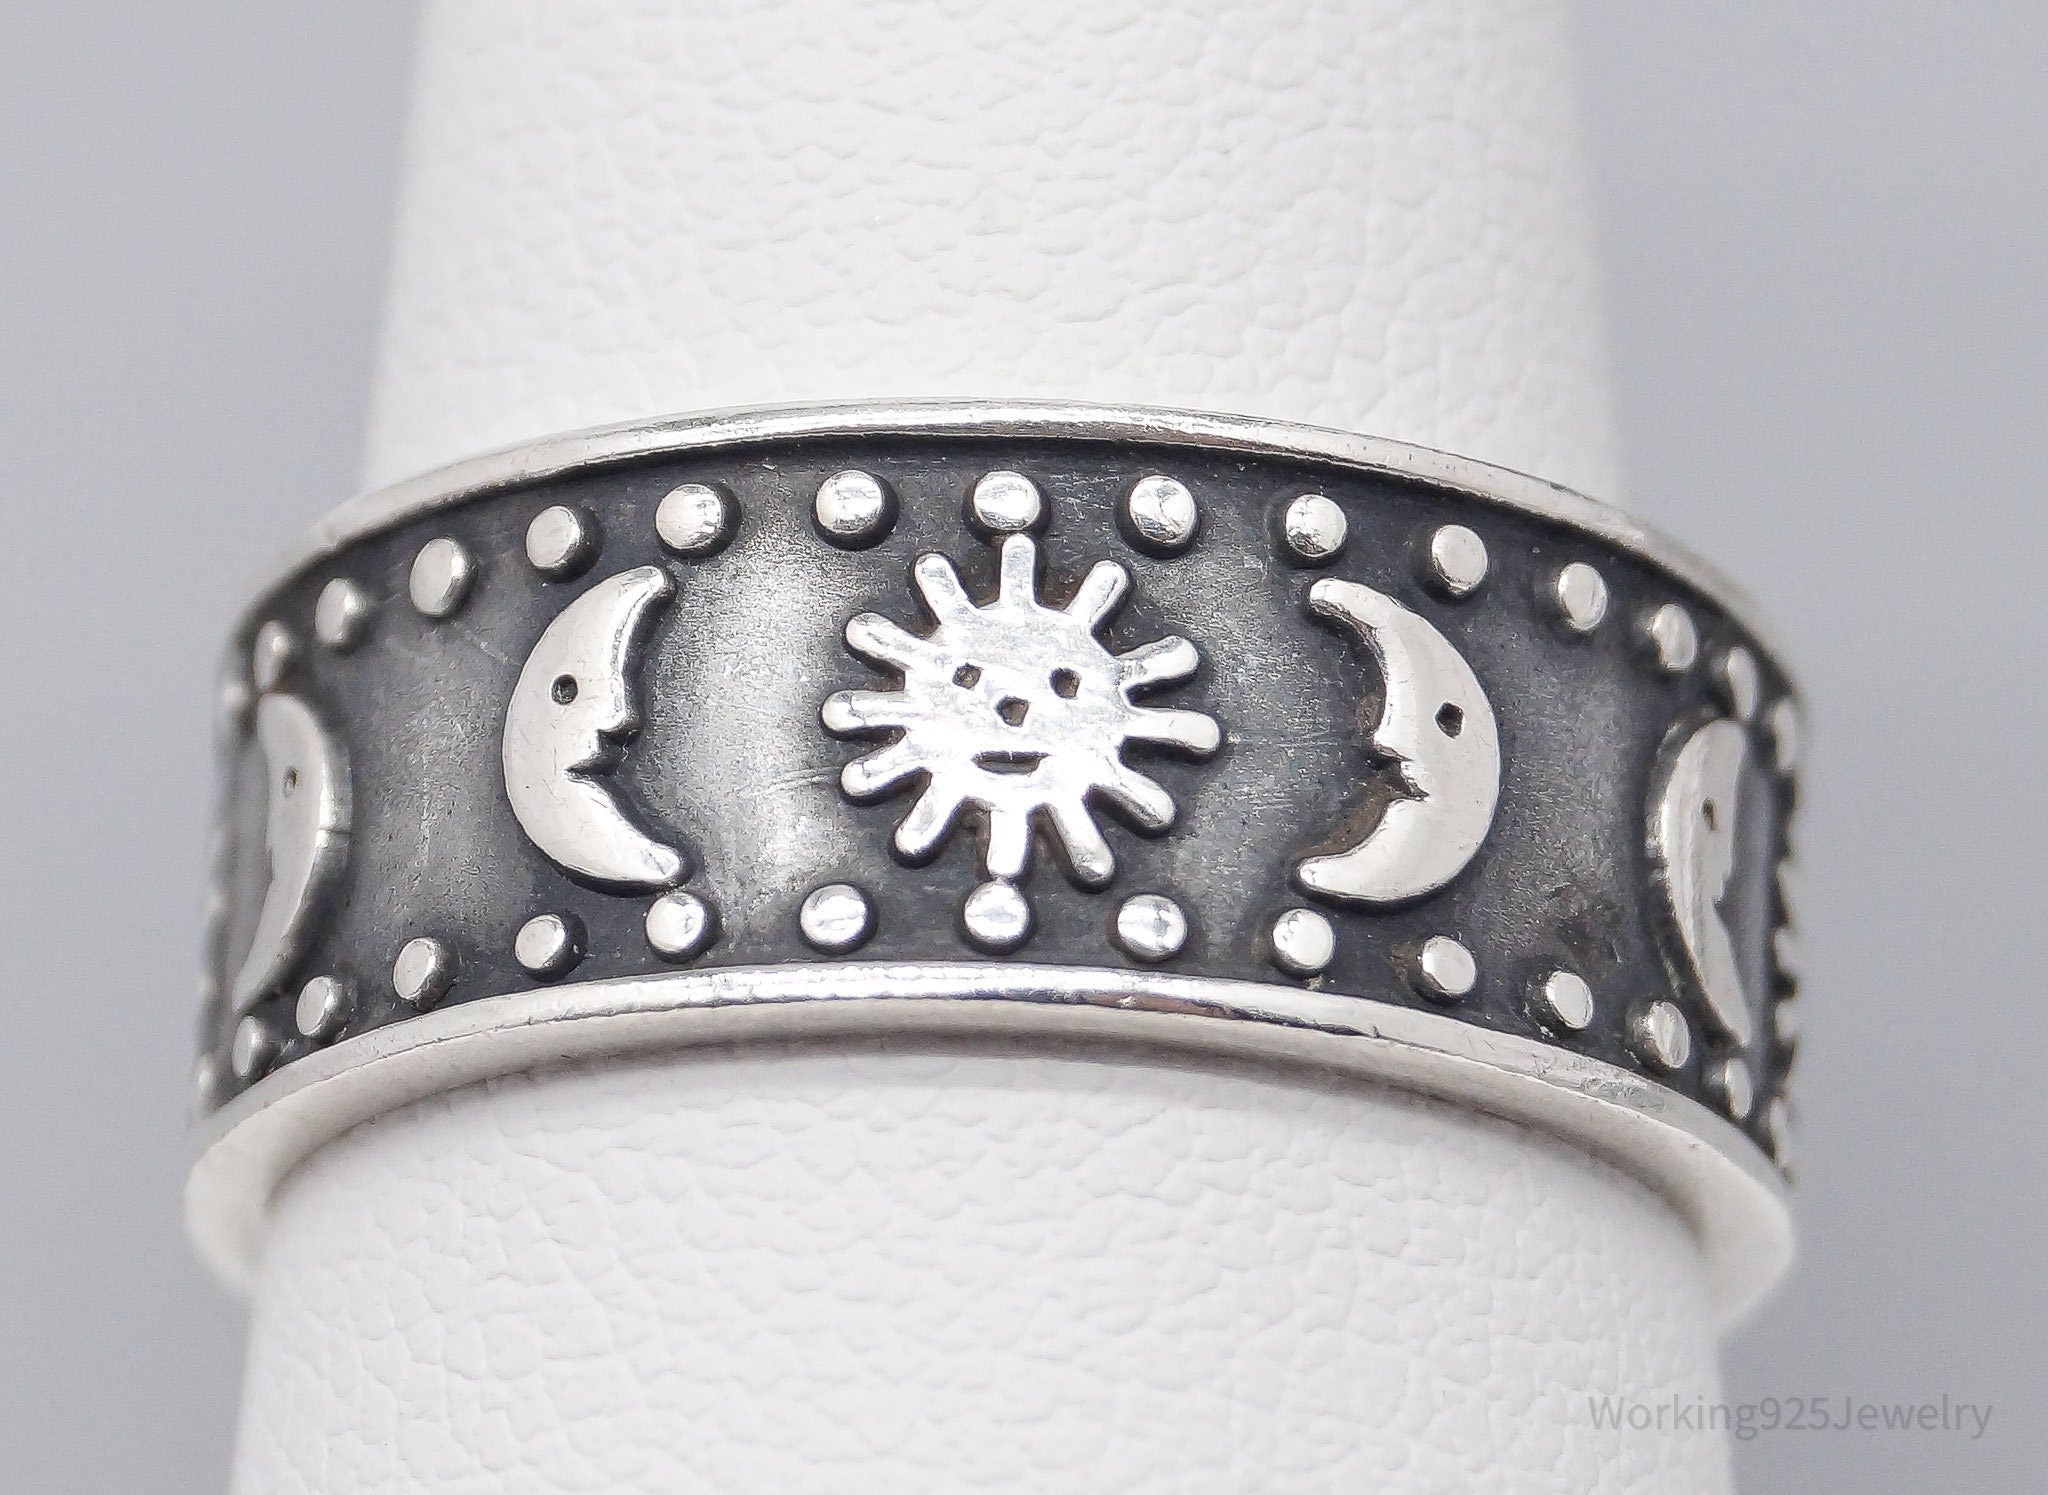 Vintage Suns & Moons Sterling Silver Band Ring - Size 8.75